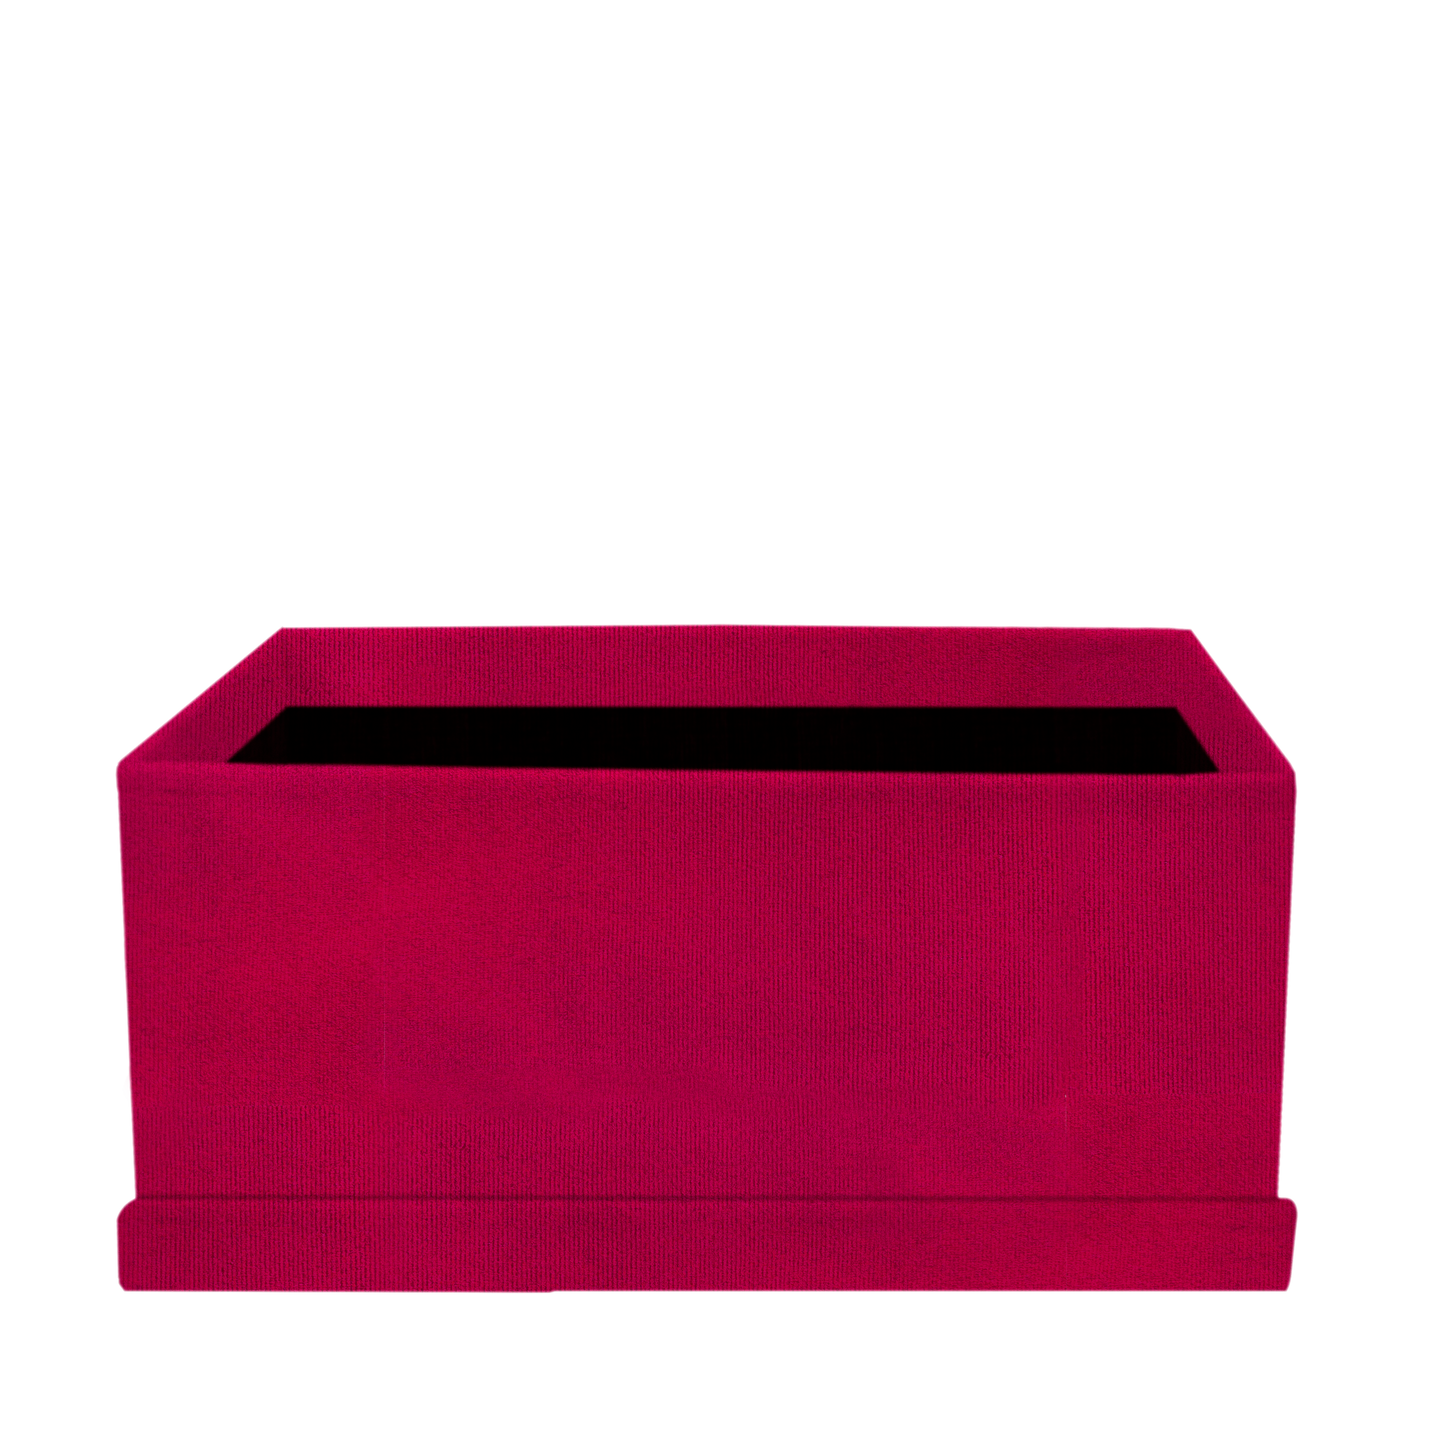 Kit 3 different sizes rectangular shape boxes 3 in 1 - Suede Fucsia